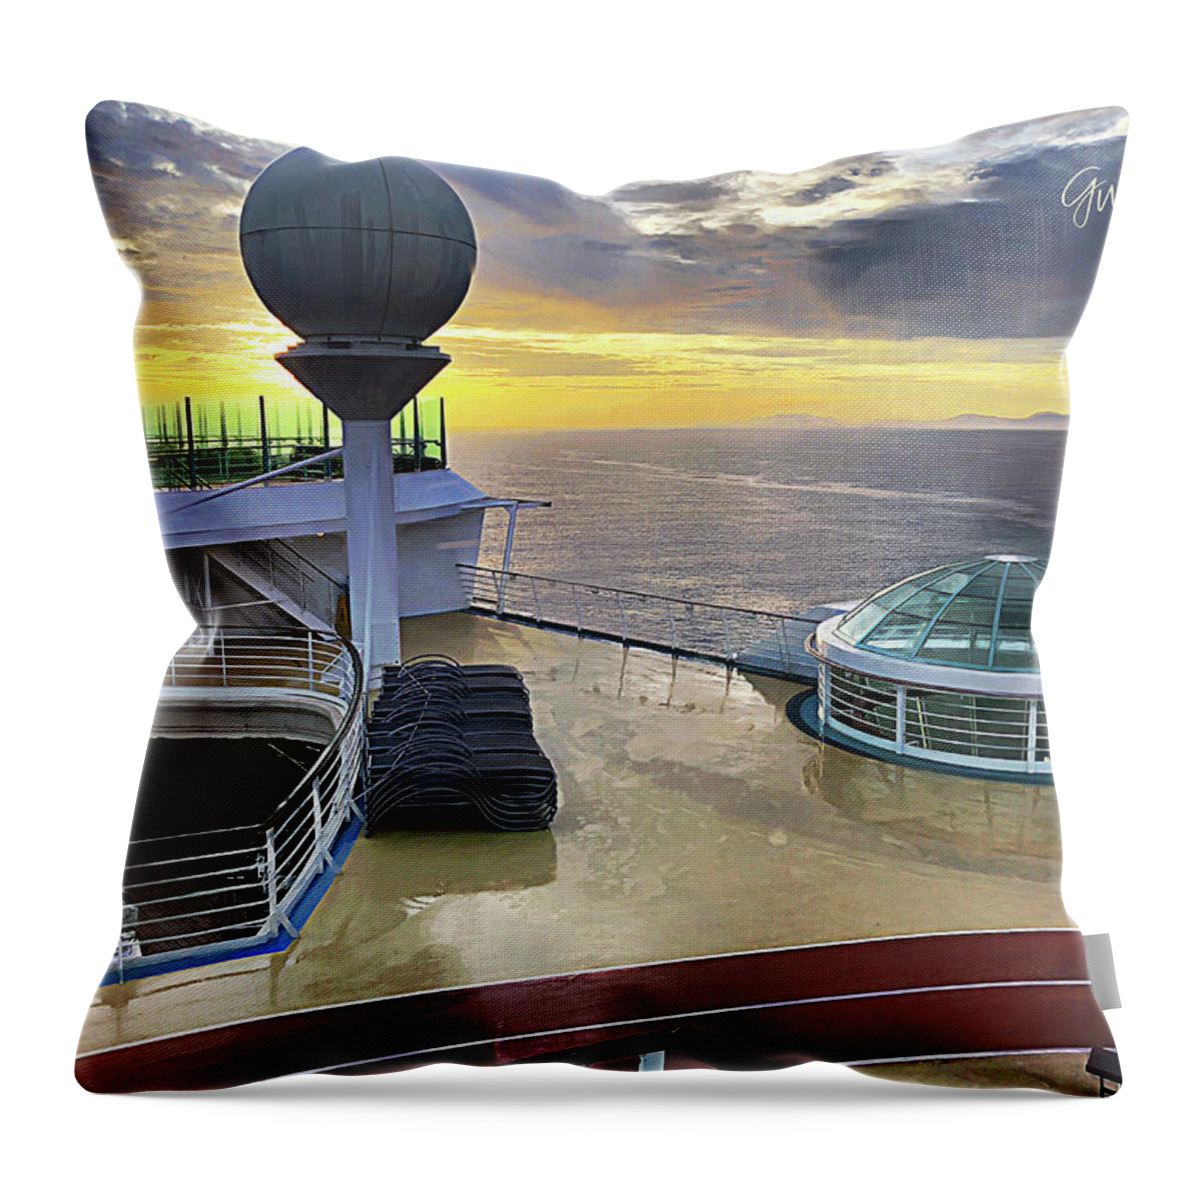 Seaborne Throw Pillow featuring the photograph Seaborne Morning by GW Mireles